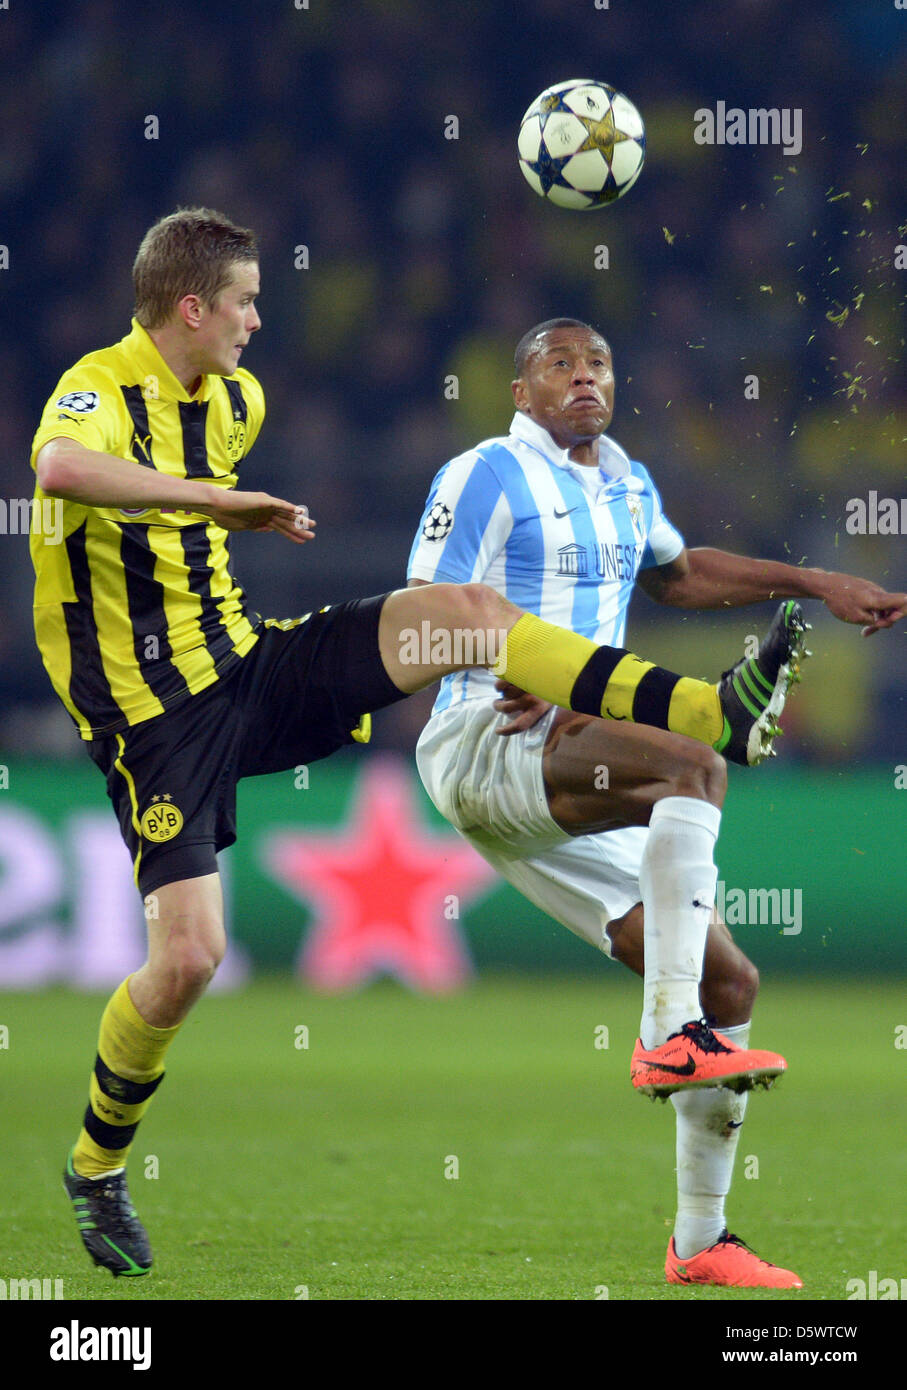 Dortmund, Germany. 9th April 2013. Dortmund's Sven Bender (L) and Malaga's Julio Baptista challenge for the ball during the UEFA Champions League quarter final second leg soccer match between Borussia Dortmund and Malaga CF at BVB stadium Dortmund in Dortmund, Germany. Credit: Action Plus Sports Images /Alamy Live News Stock Photo